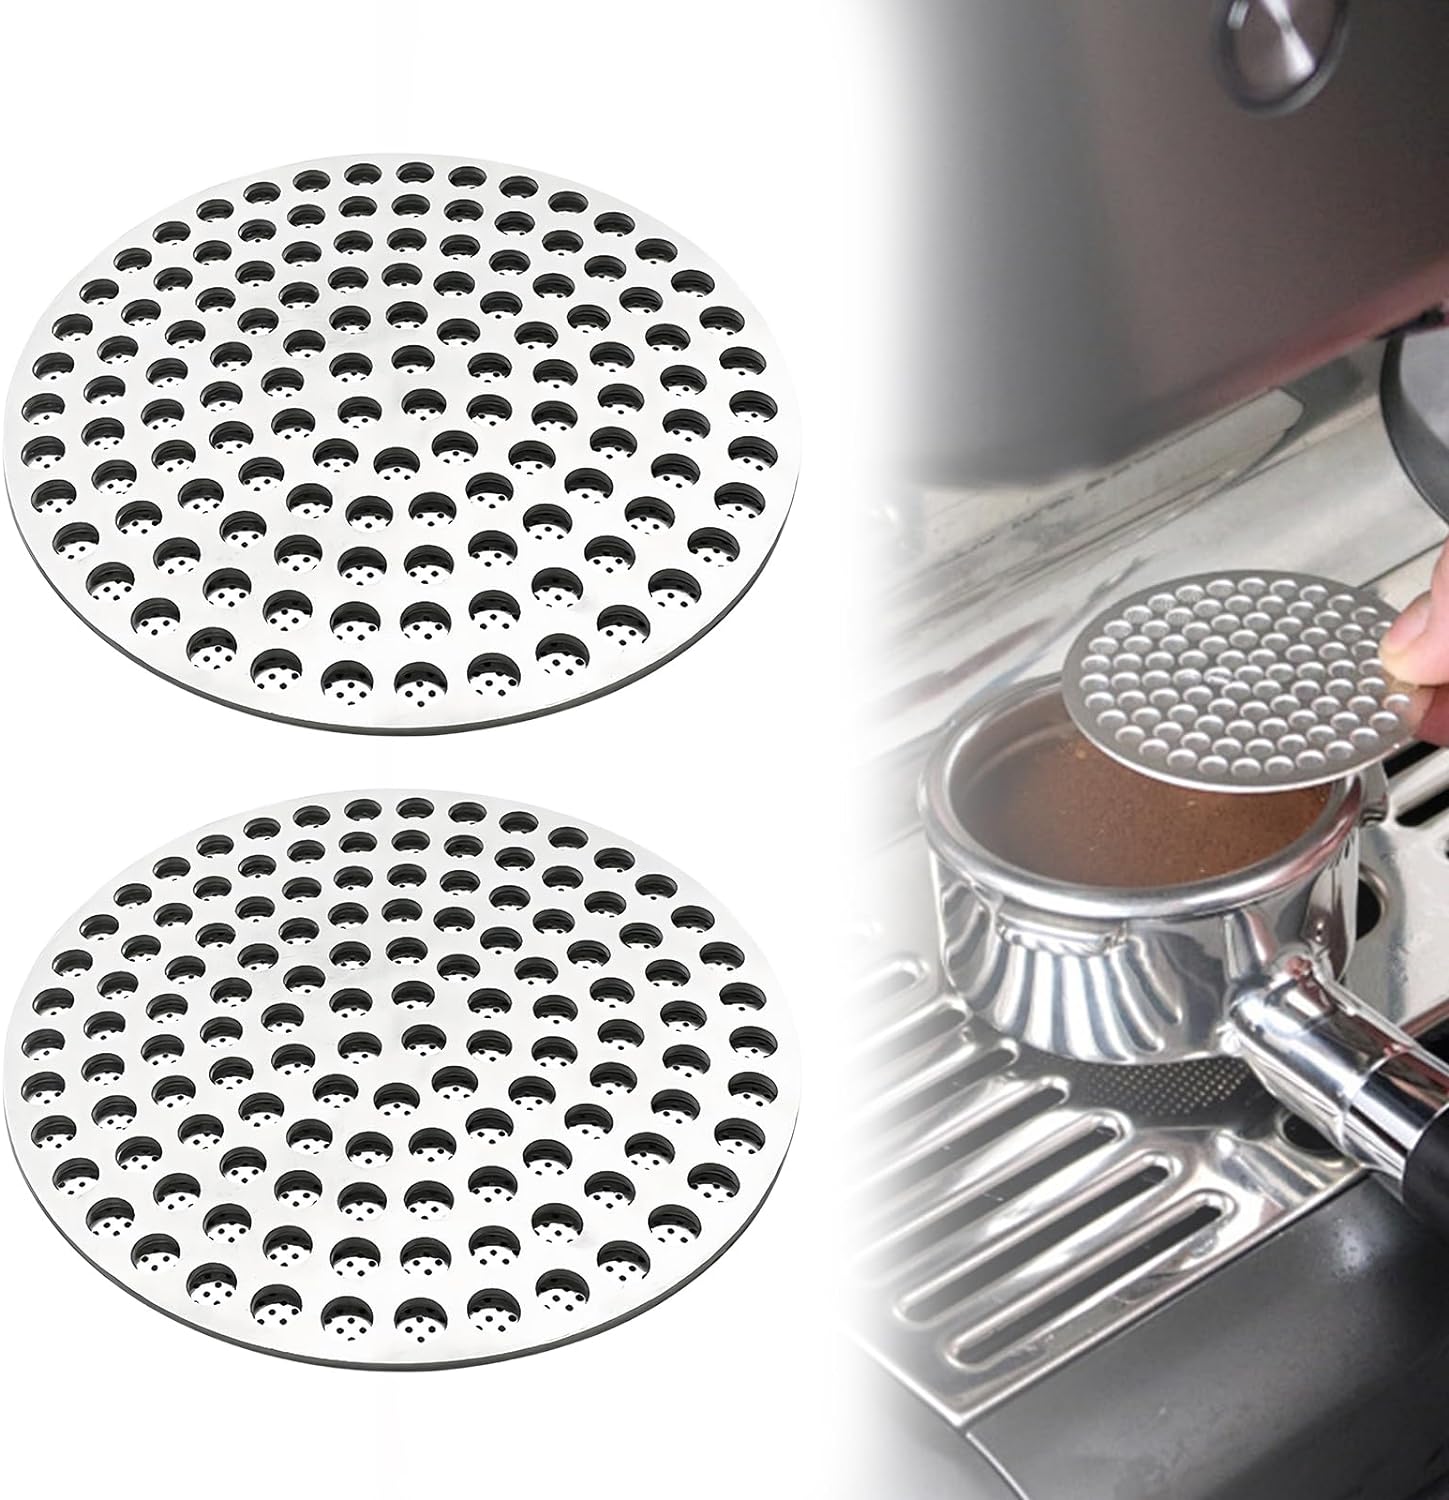 Pack of 2 Puck Screen 51/53/58 mm, Strainer for Portafilter, 1.2 mm Thickness 150 μm, 304 Stainless Steel, Reusable Portatilter, Filter Holder Accessories for Coffee Machine (58 mm)